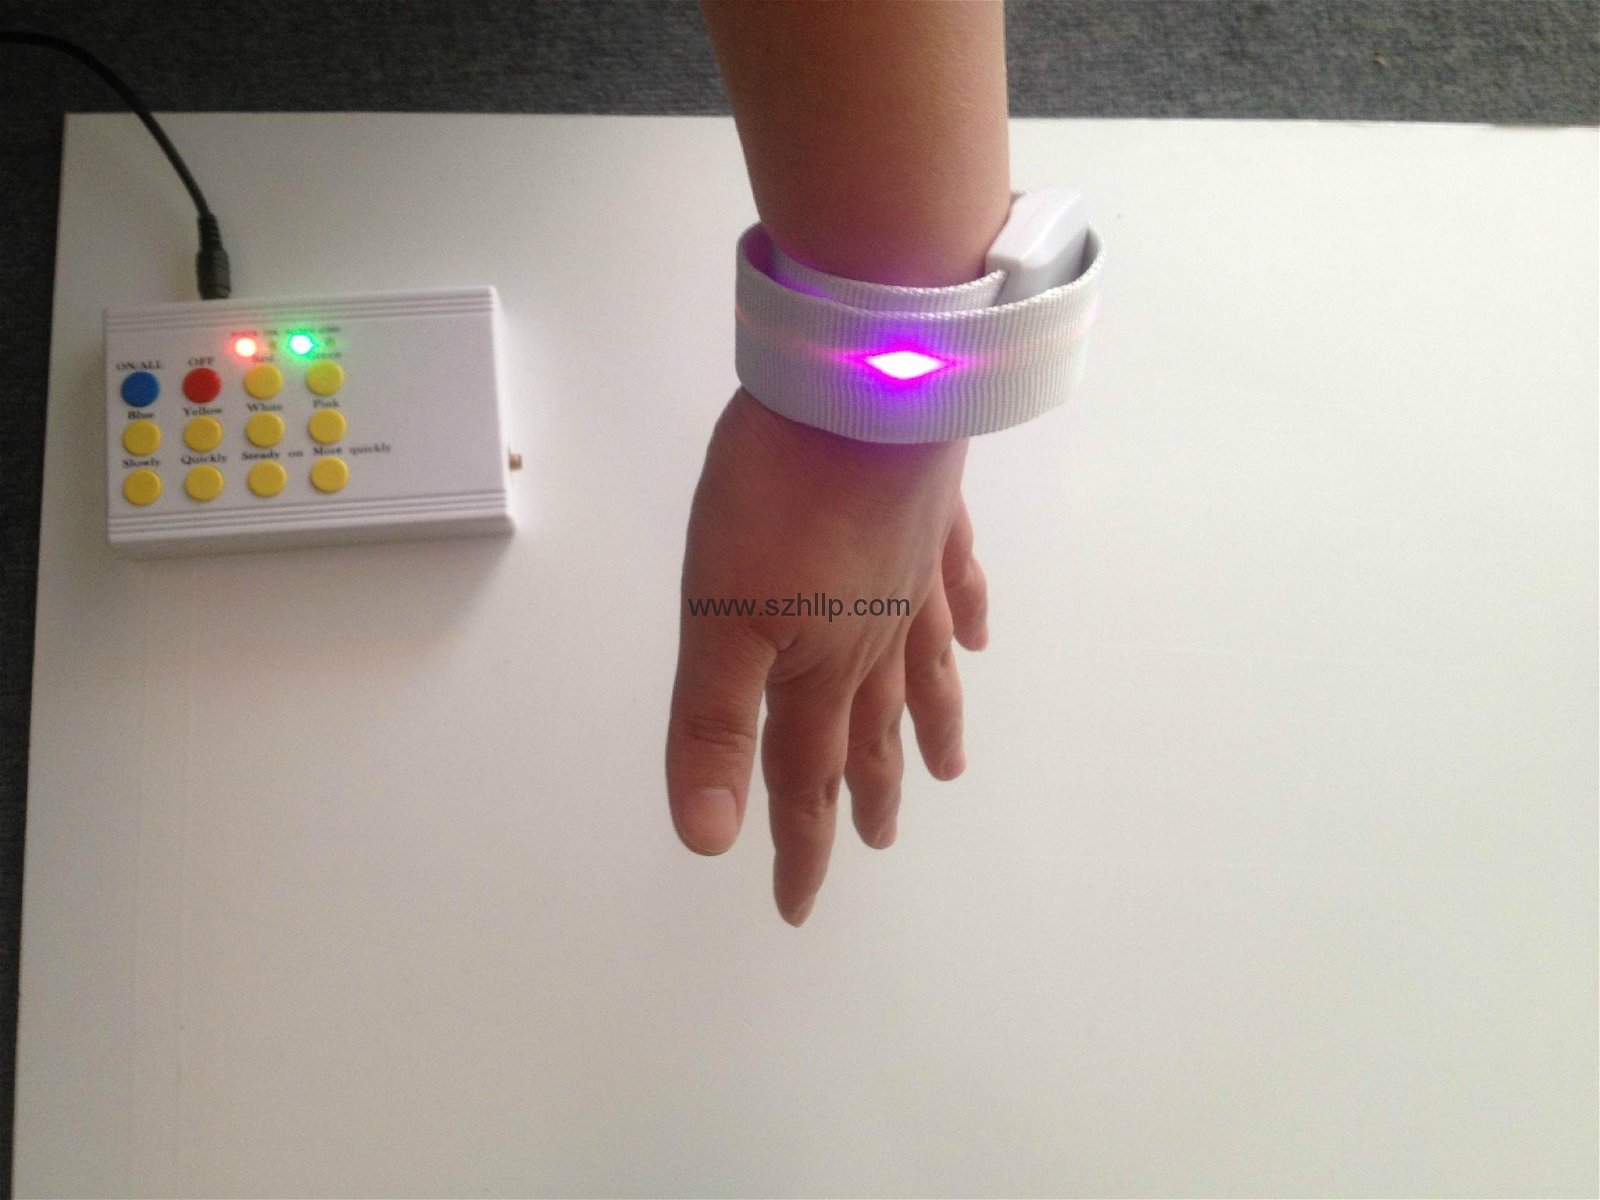 Slap Wristband Bracelet with Remote Controlled LED Light for 2015 Event